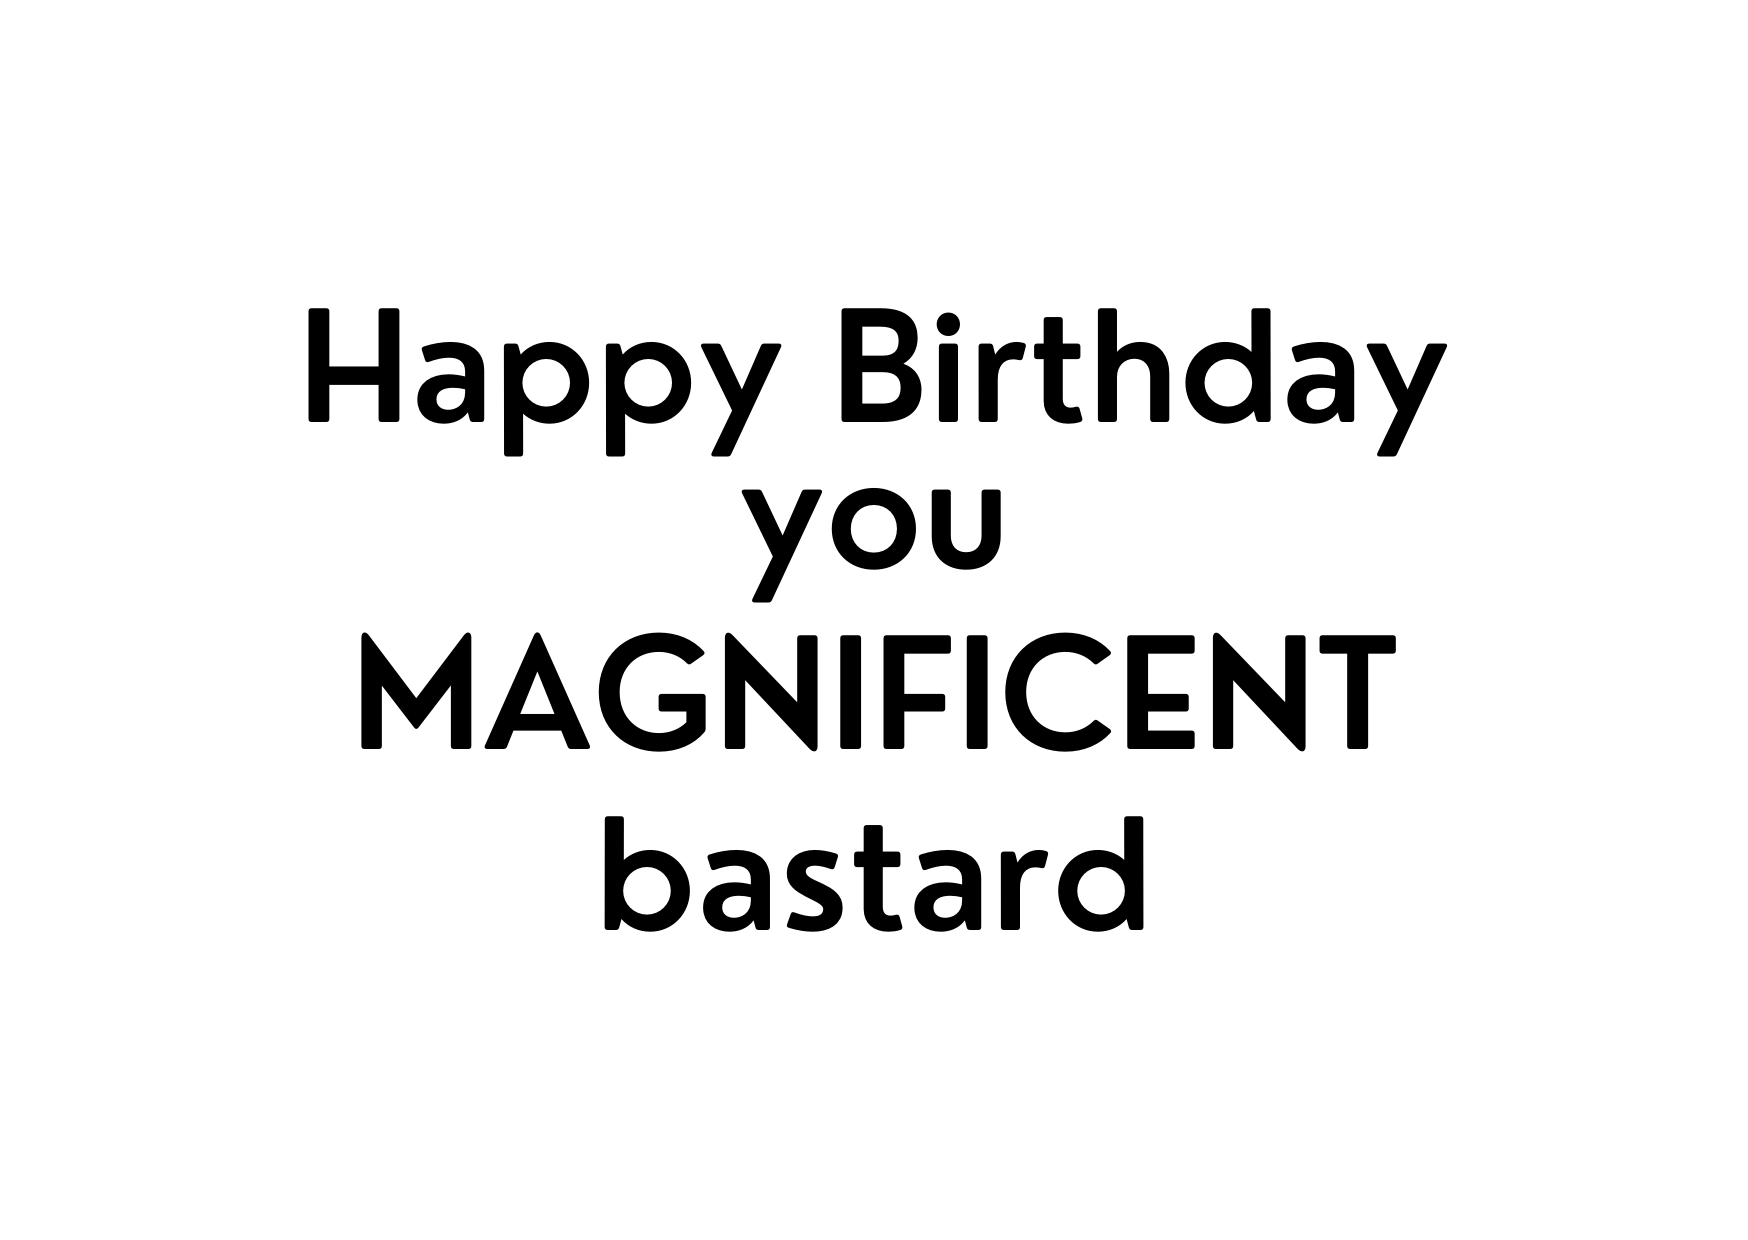 White seed paper greeting card saying "Happy Birthday you magnificent bastard"